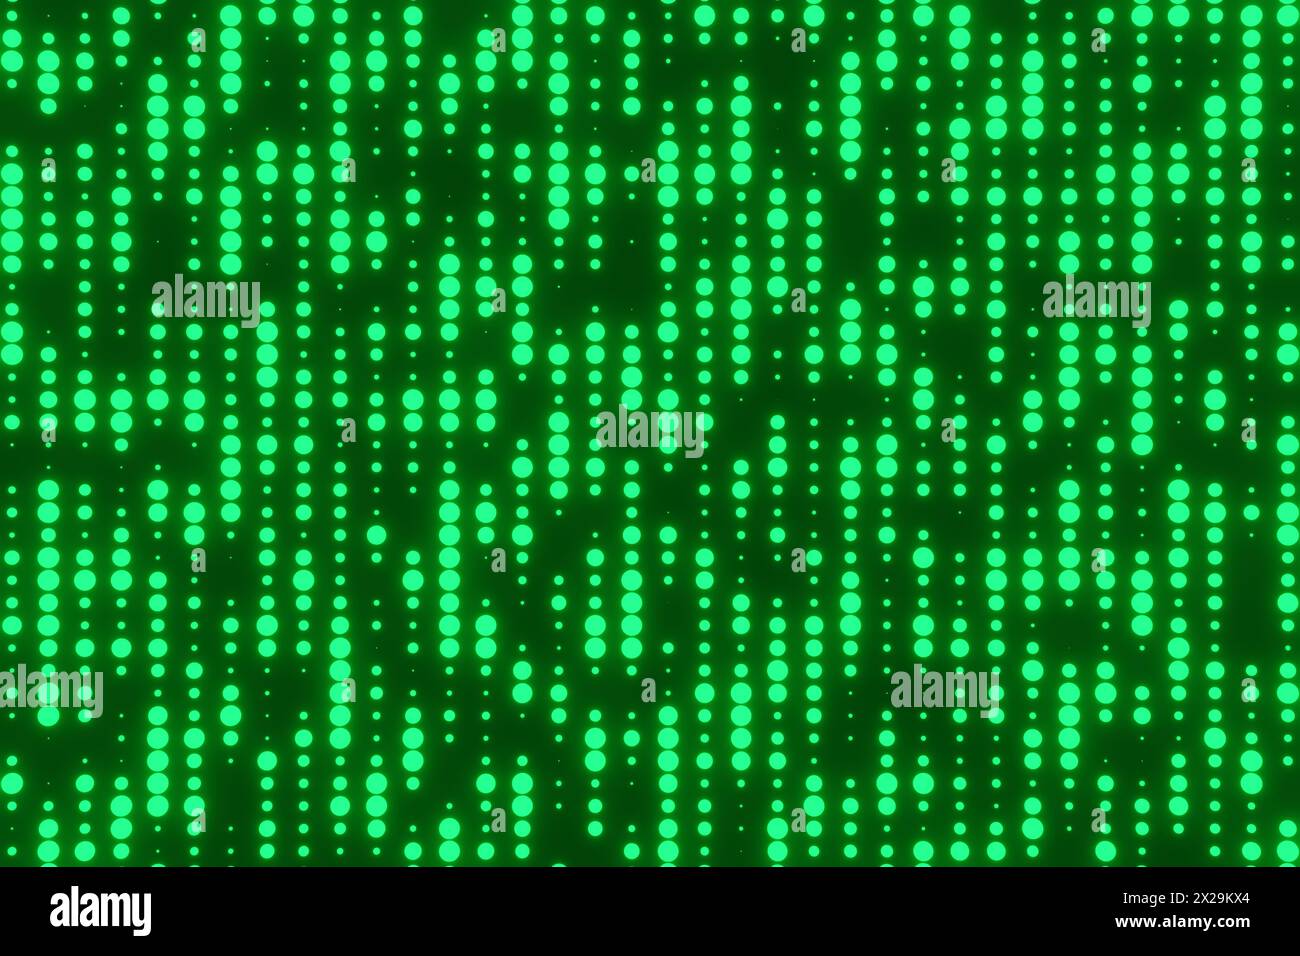 Glowing green dots forming a retro CRT computer screen effect. Background and wallpaper for topics of technology, computer science and electronics Stock Photo